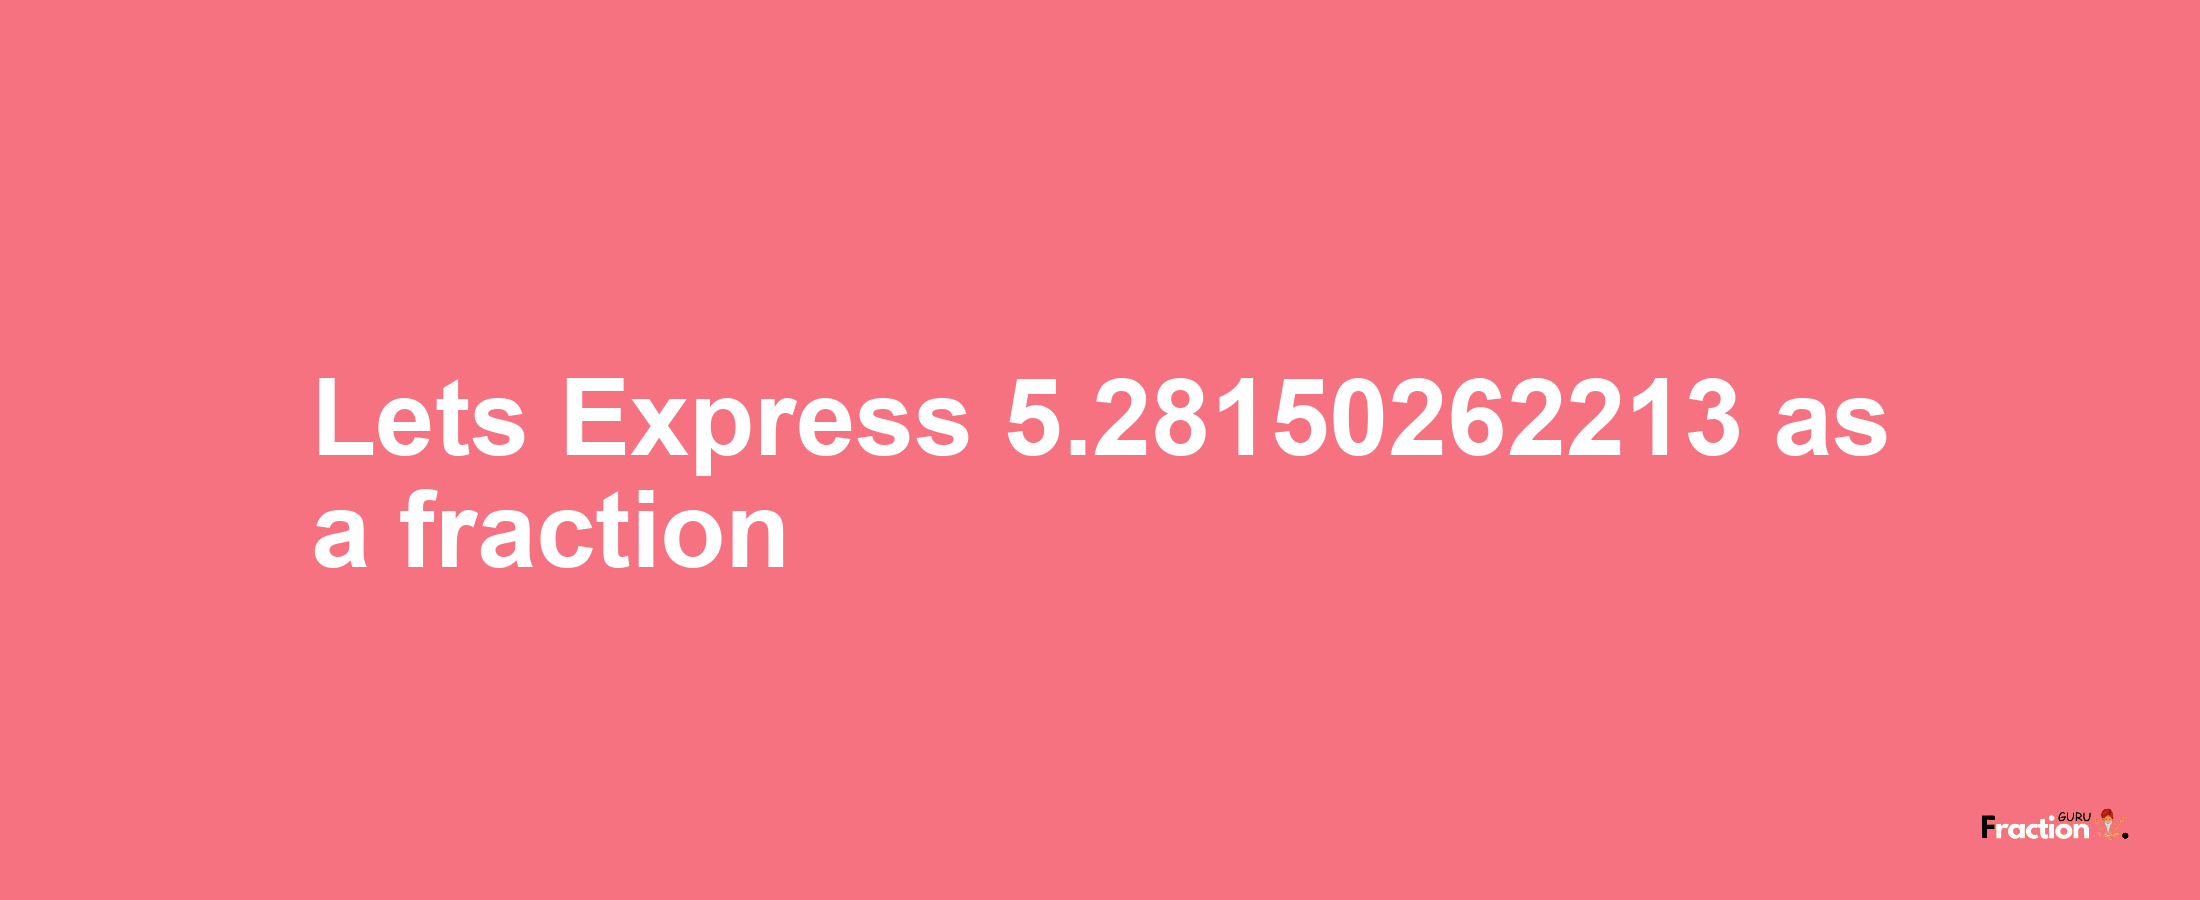 Lets Express 5.28150262213 as afraction